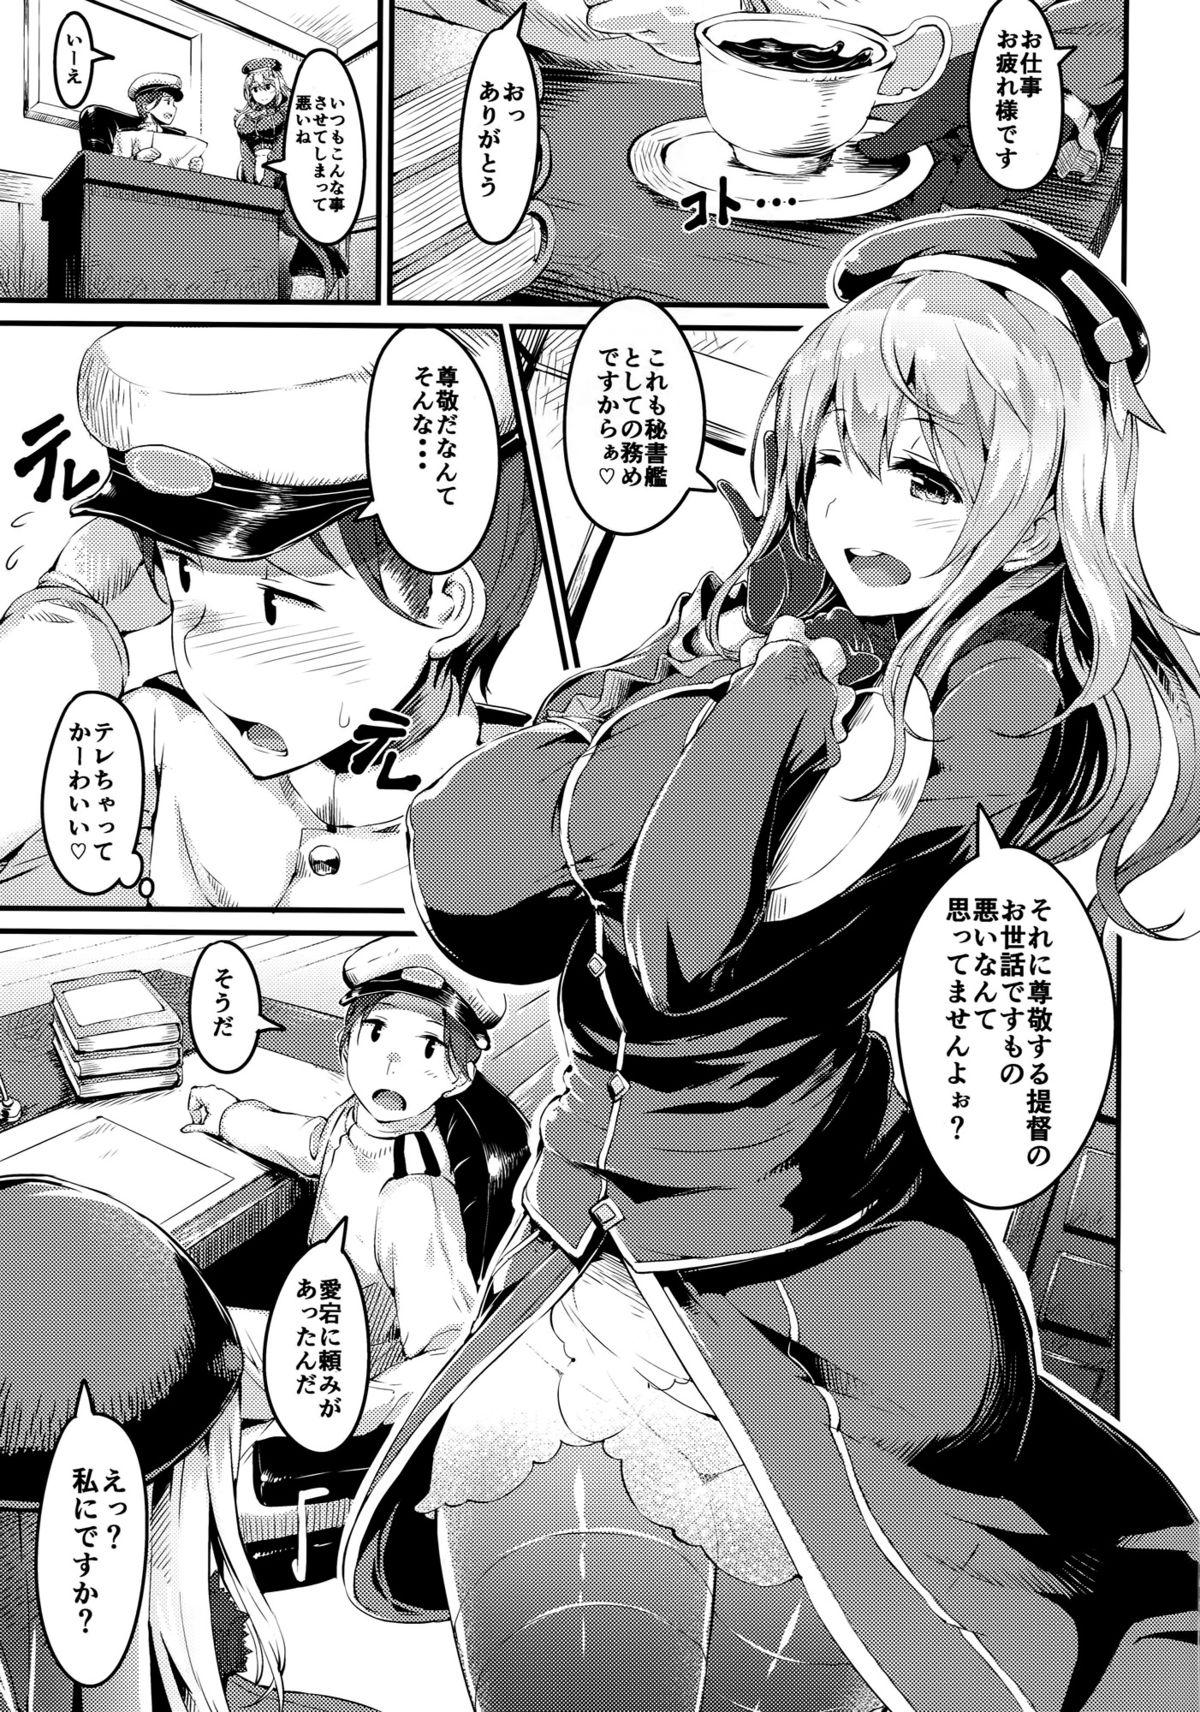 French ATG - Kantai collection Student - Page 2